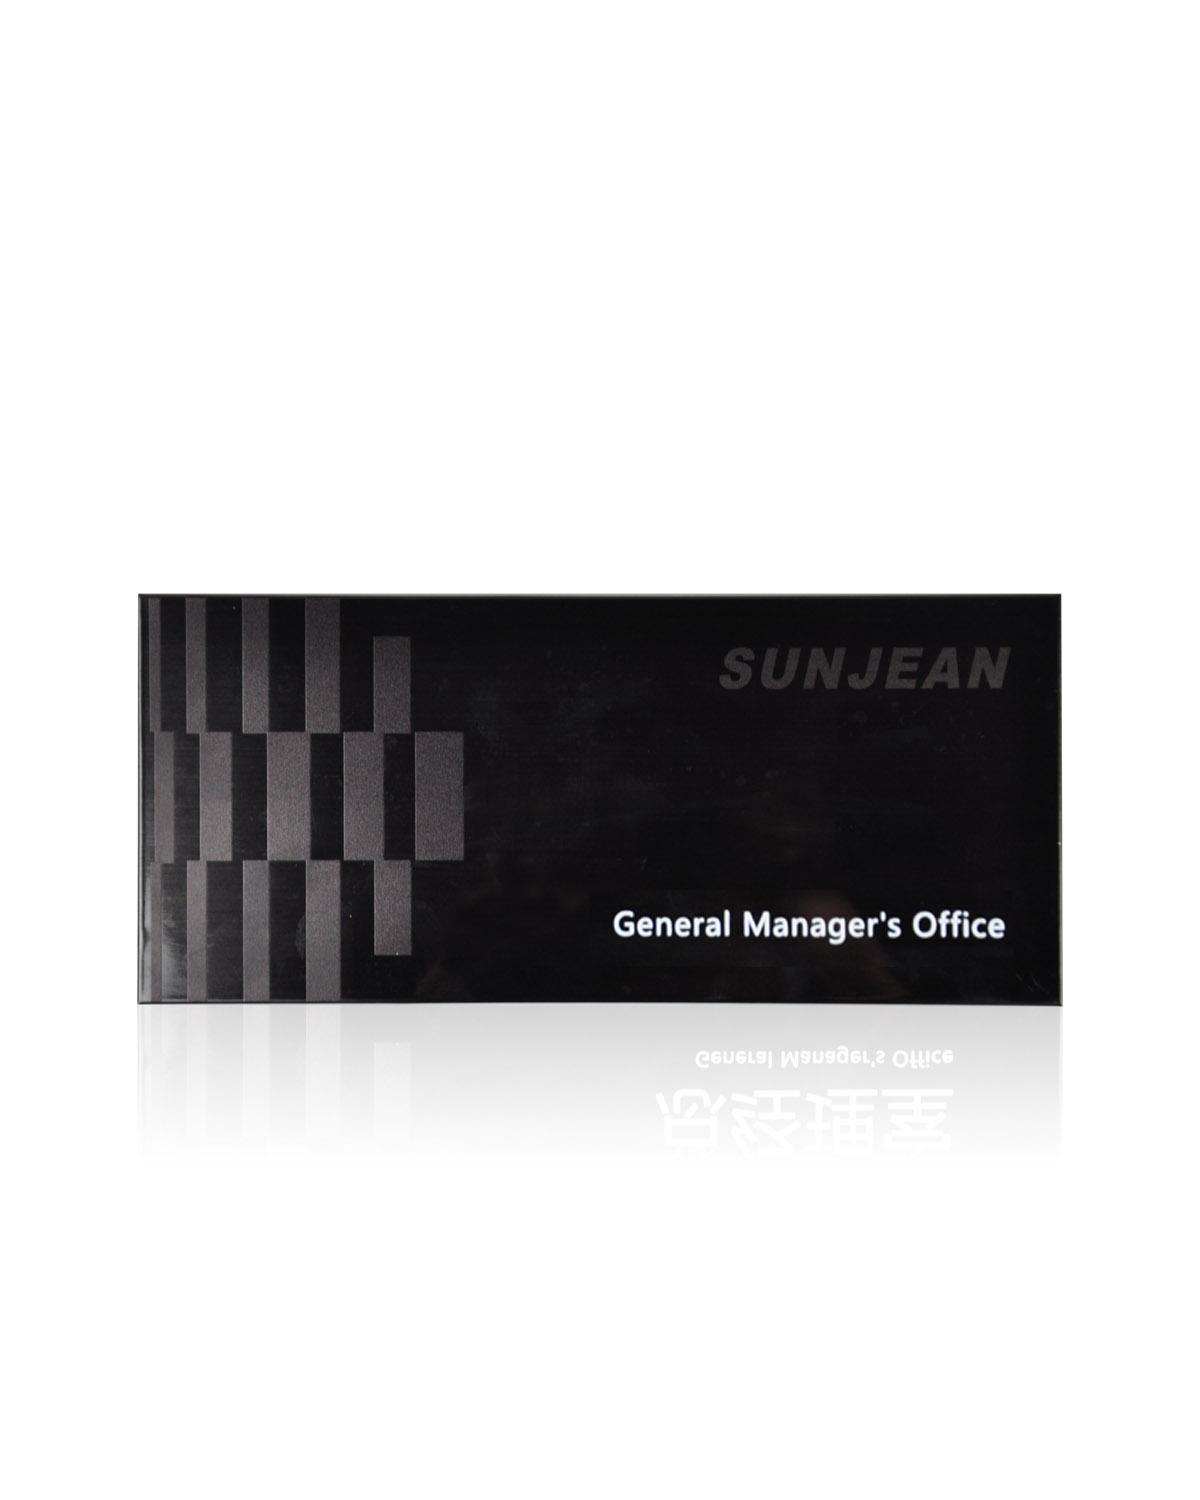 SUNJEAN Metal Name Plate, 250mm (W) x 110mm(H) Stainless Steel Frame Name Label Art Tag Laser Engraved Name Plates with Adhesive Backing or Screws，Custom Patterns